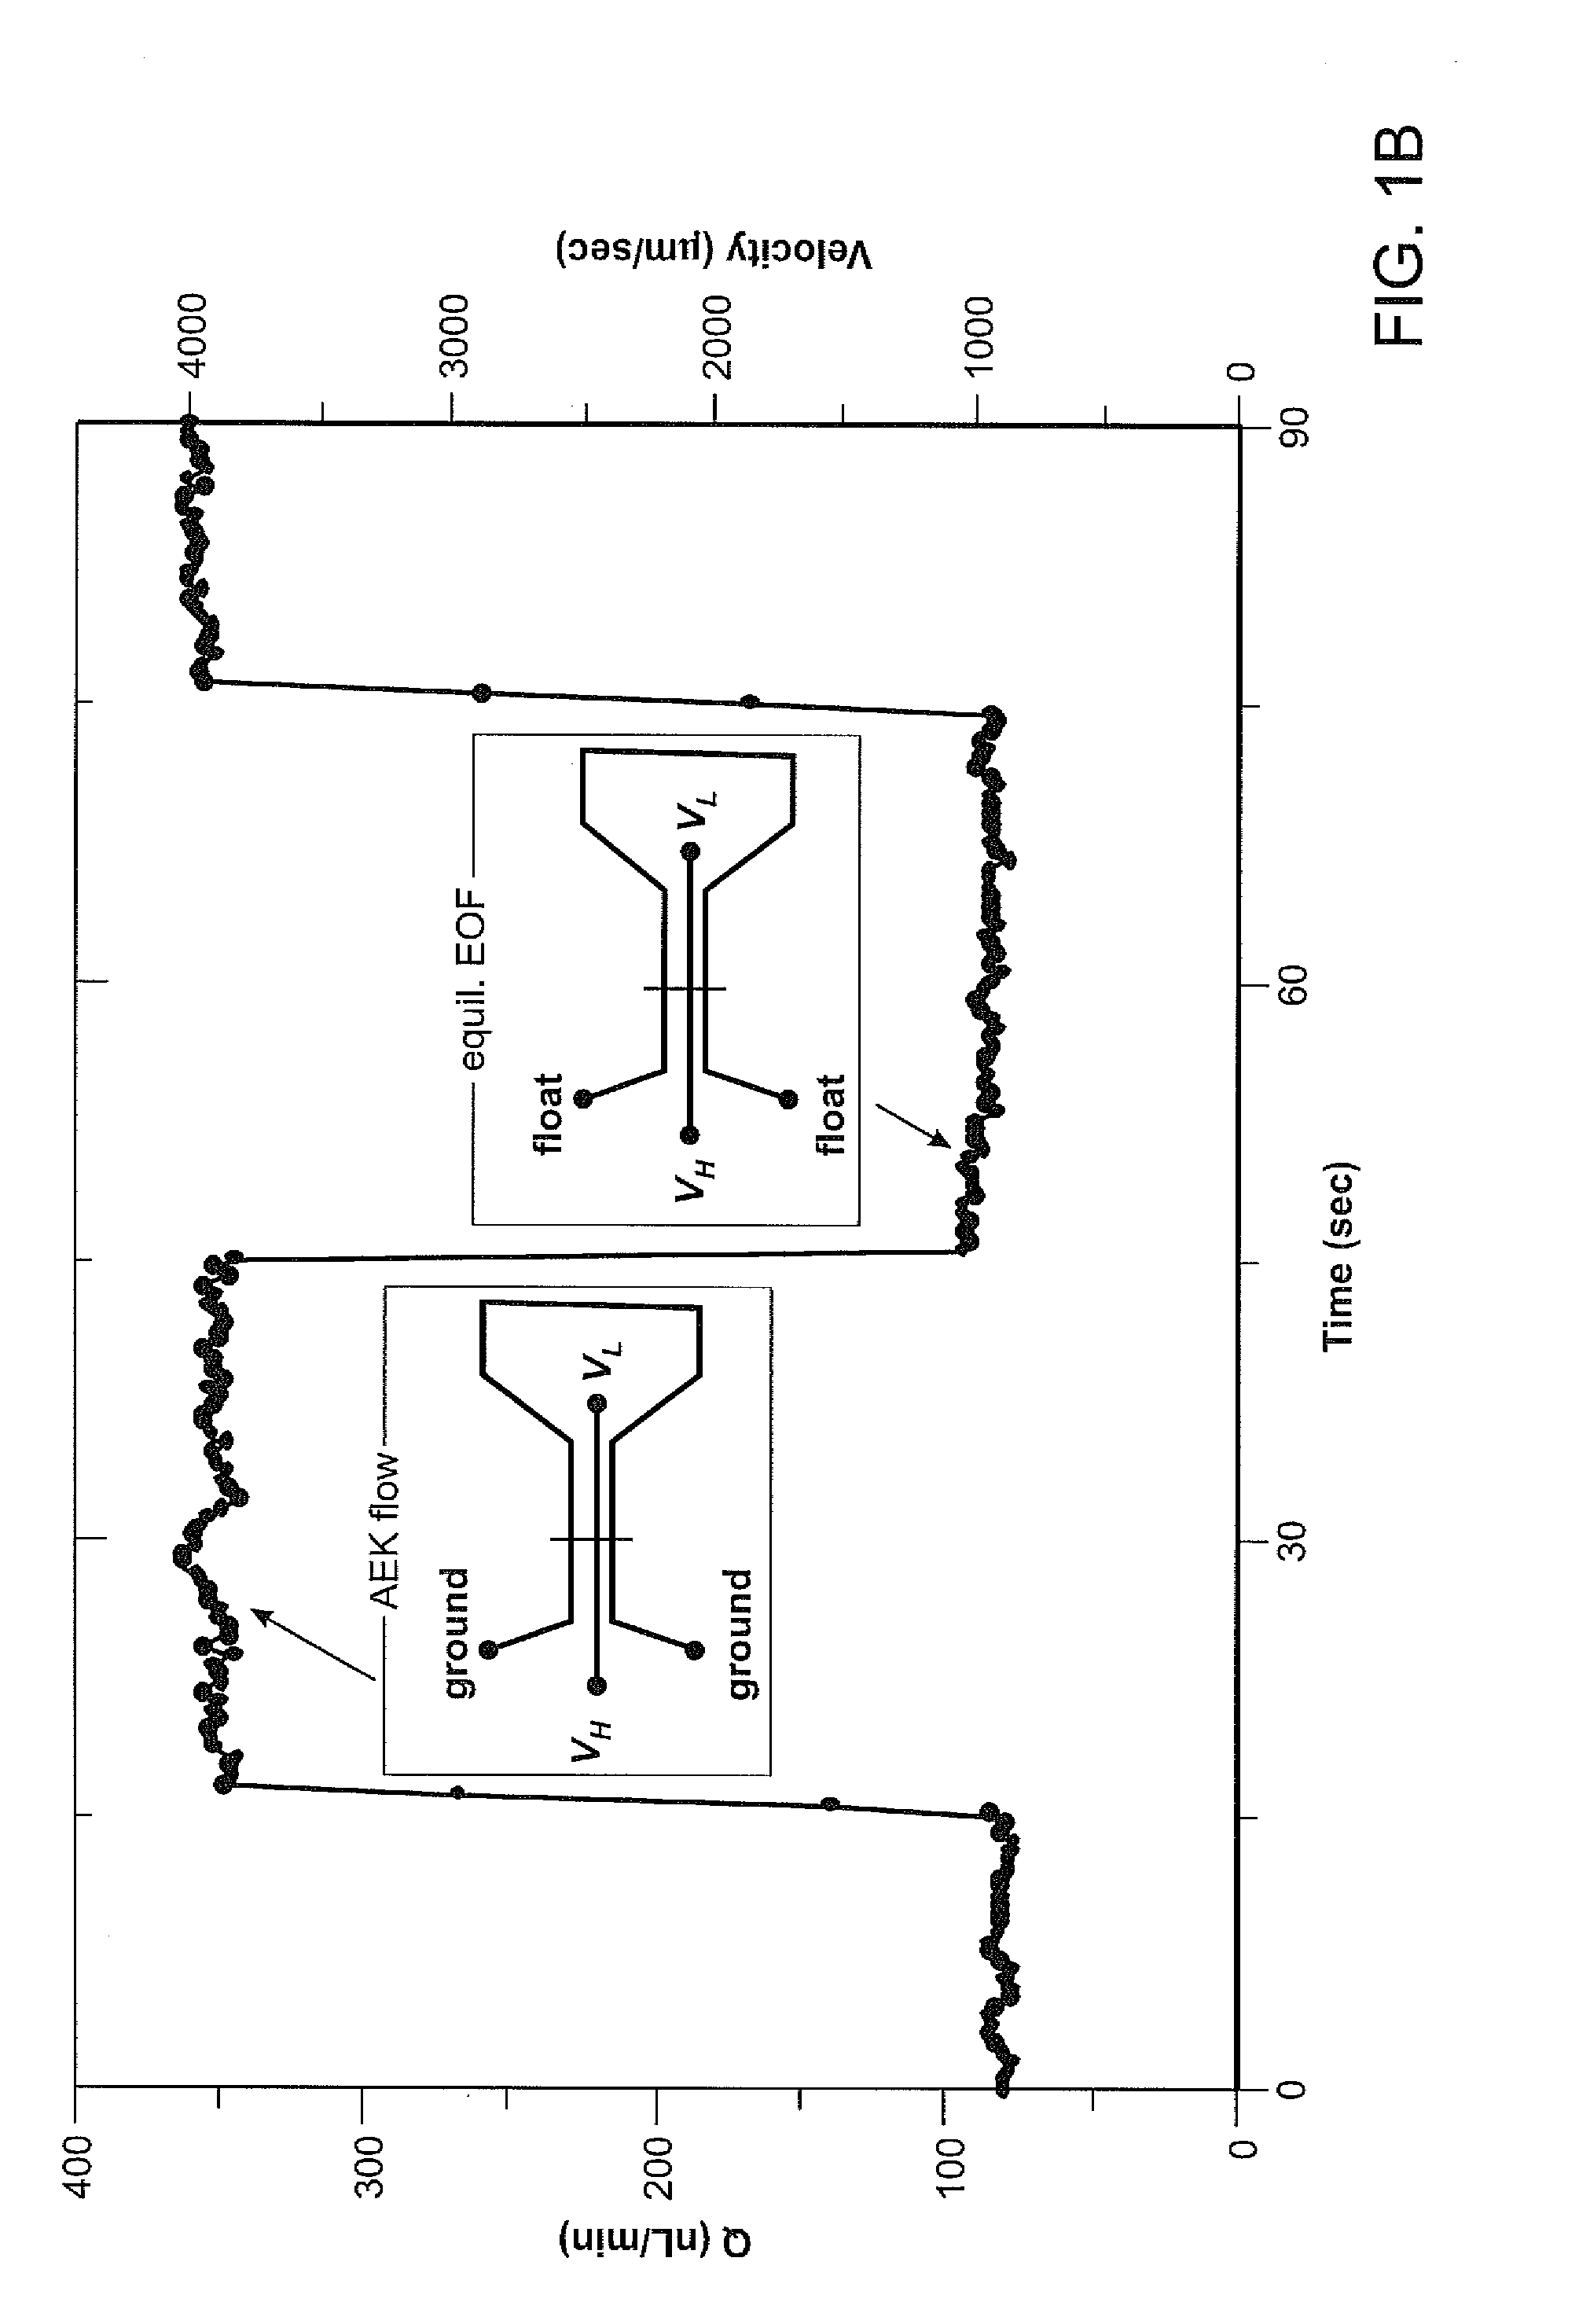 Amplified electrokinetic fluid pumping switching and desalting